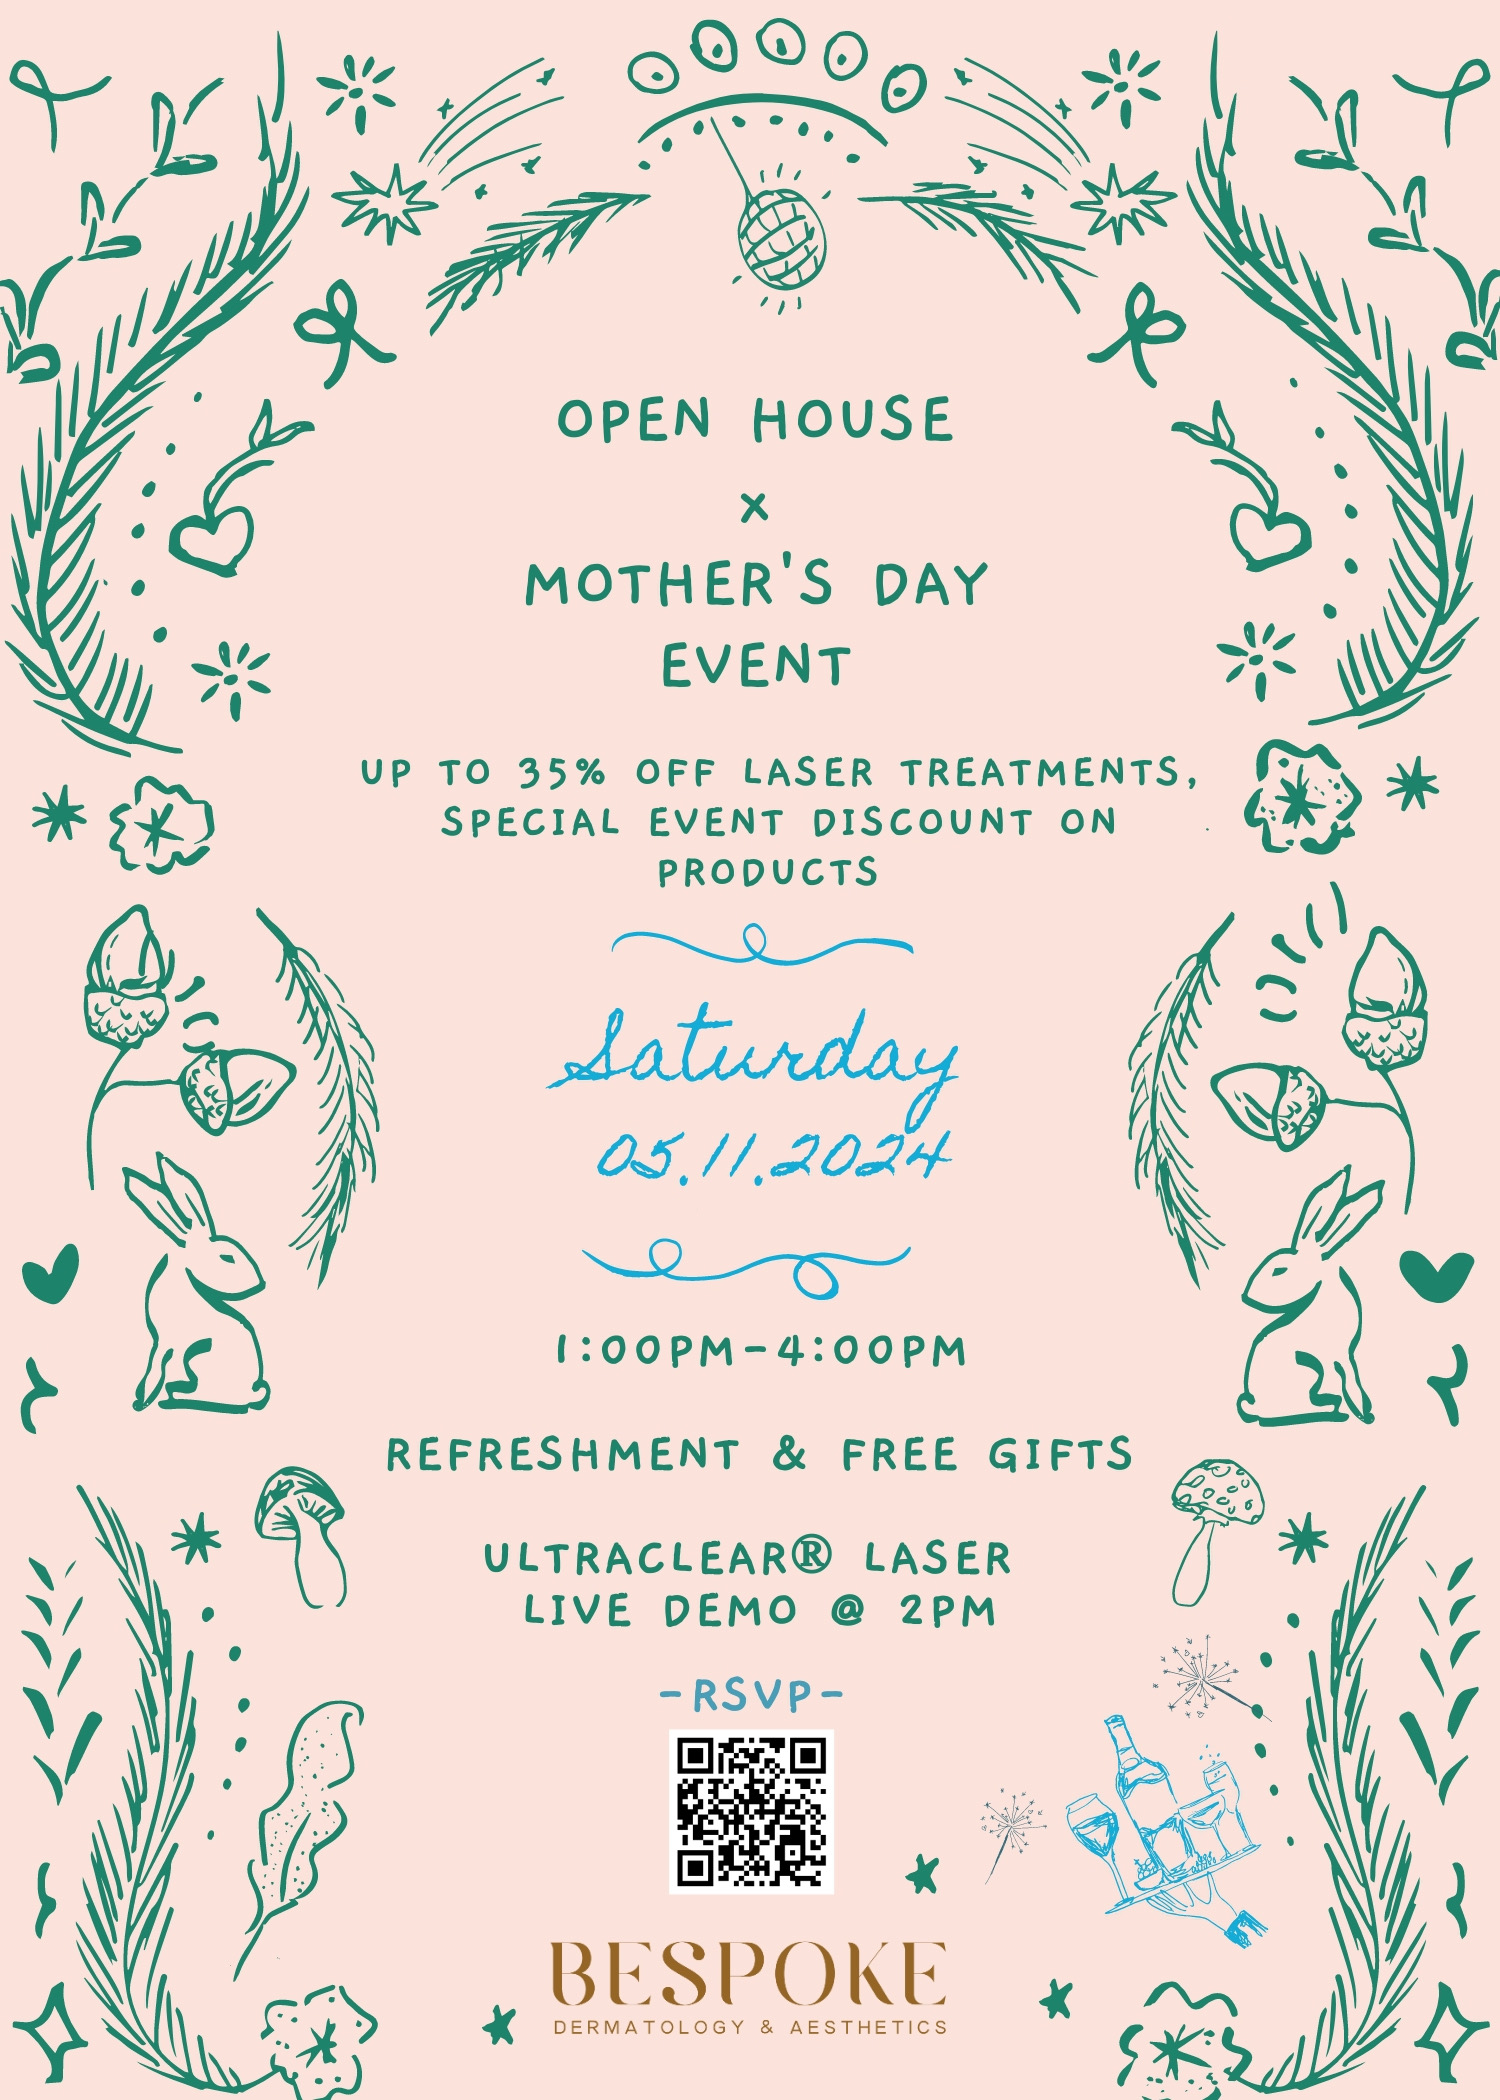 Bespoke Wellness open house and mother's day event flyer 